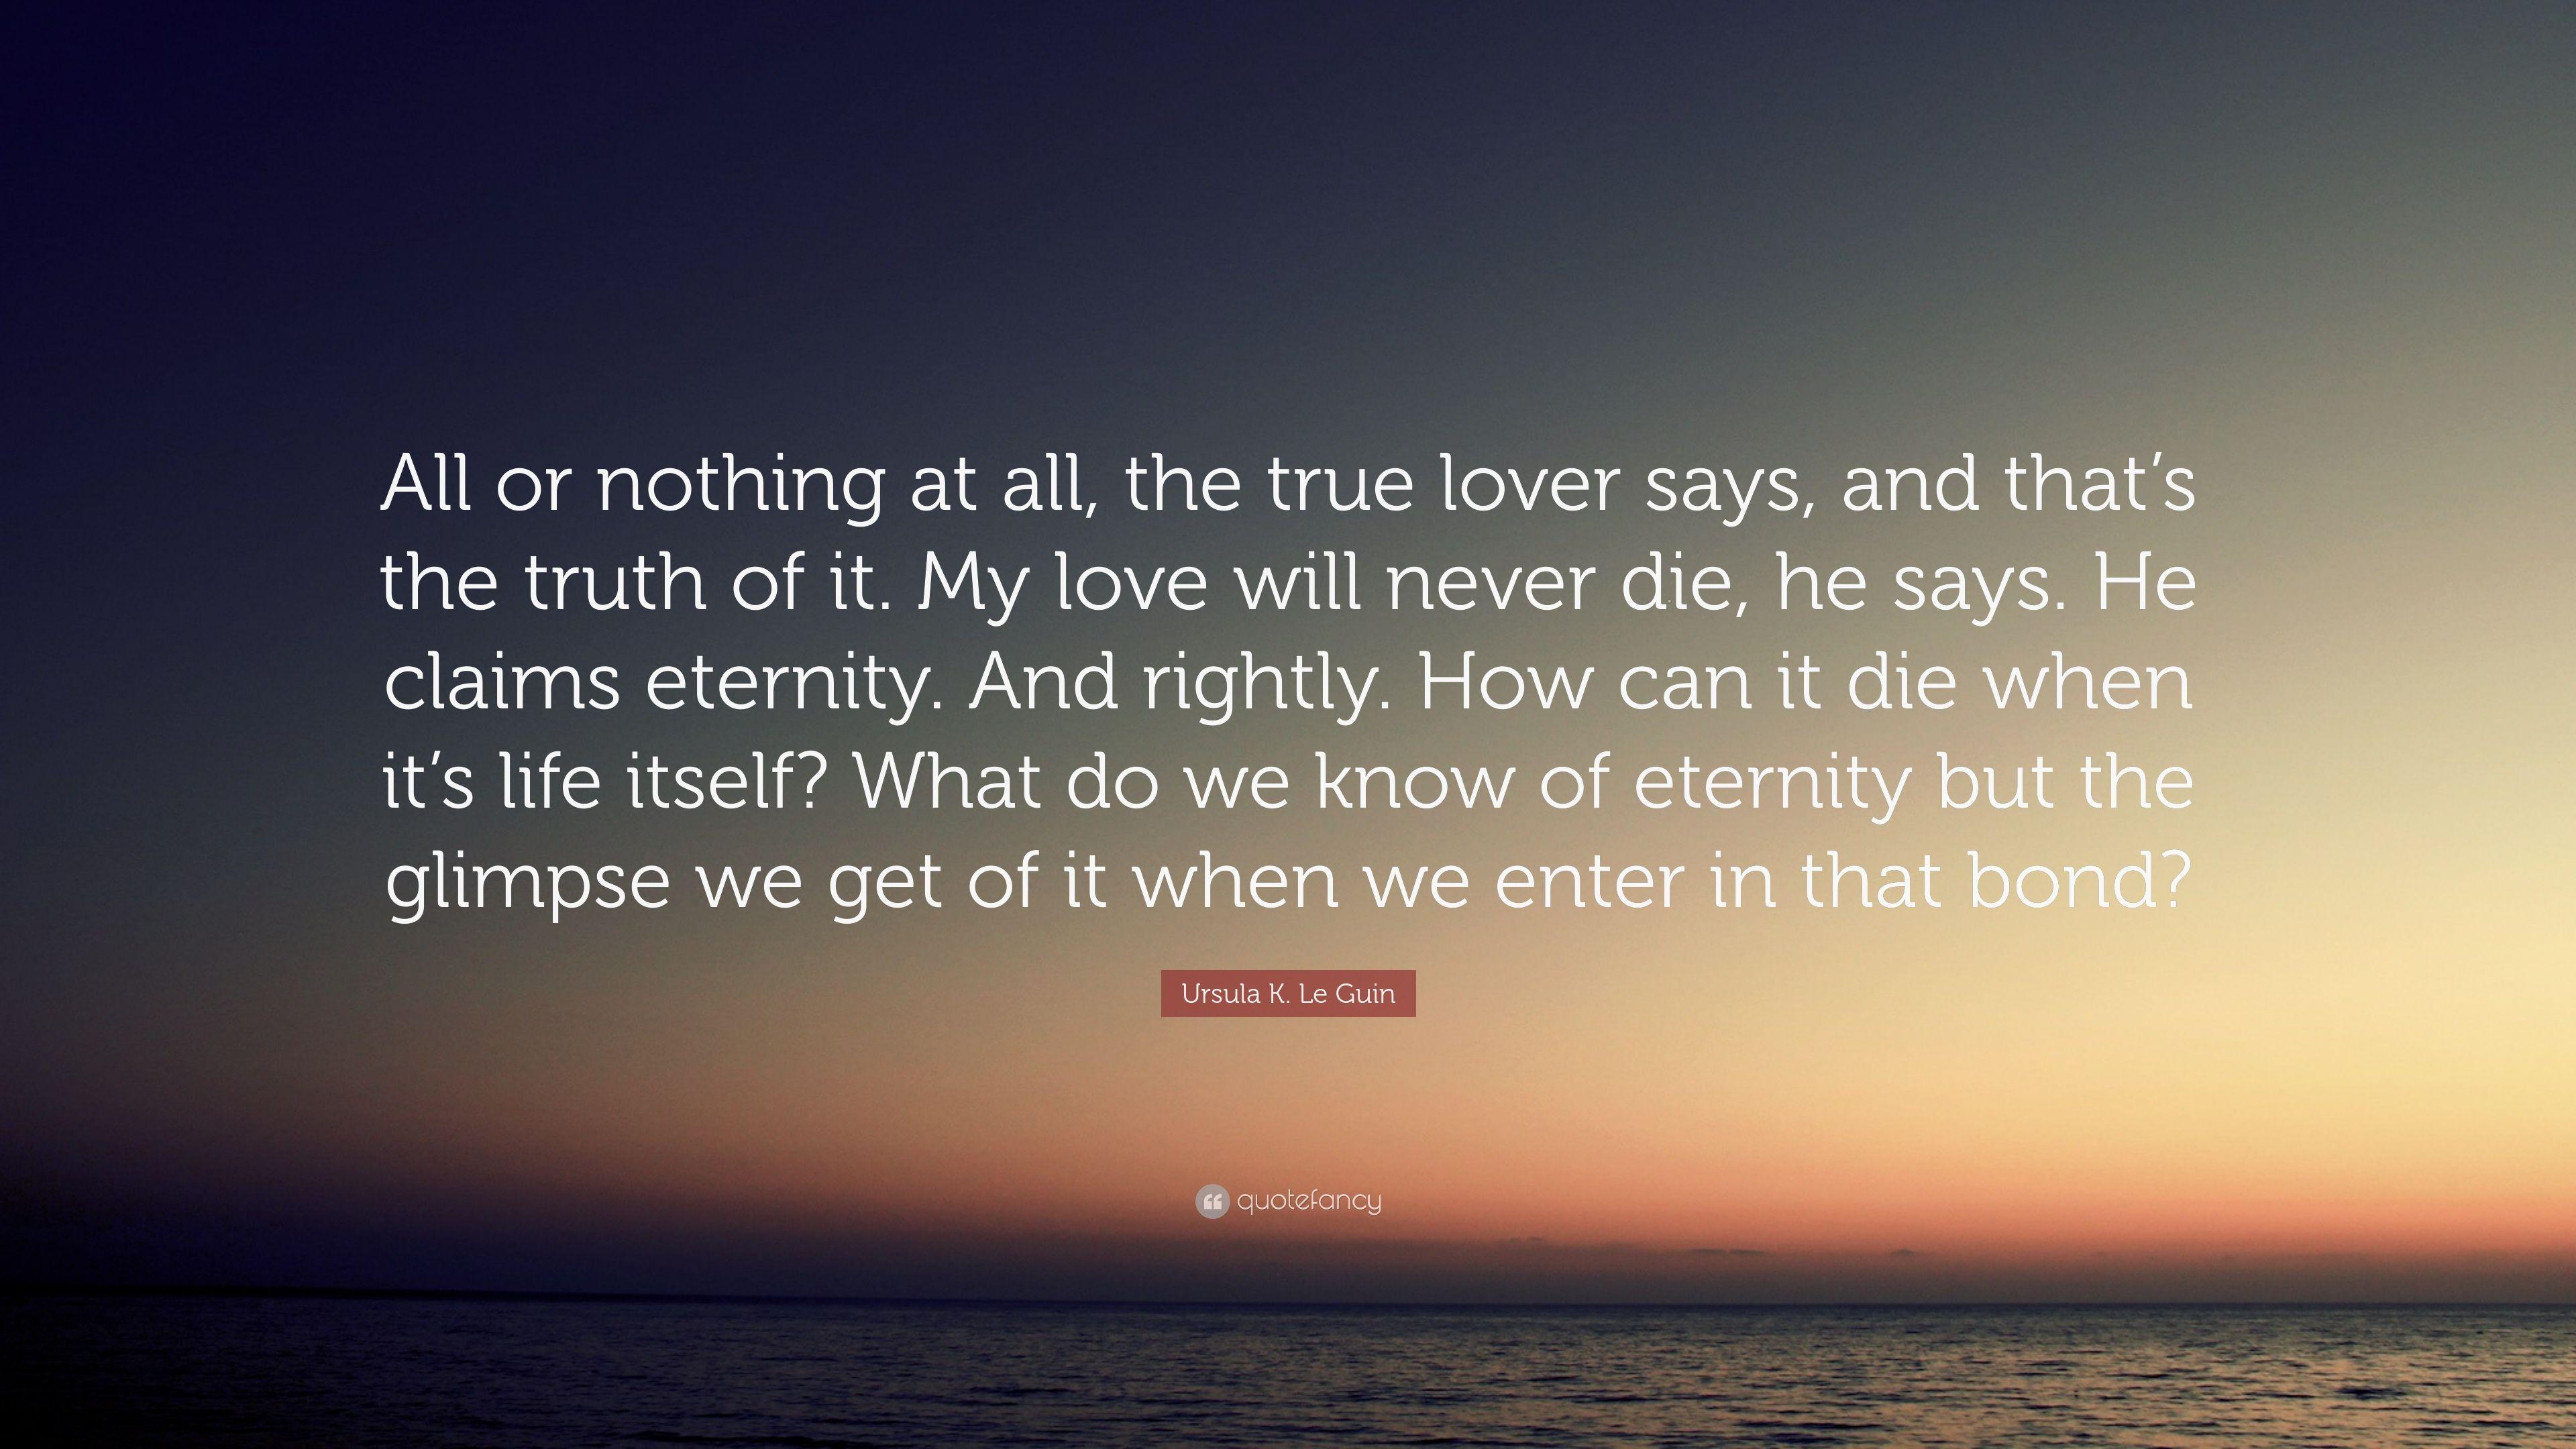 Ursula K. Le Guin Quote: “All or nothing at all, the true lover says